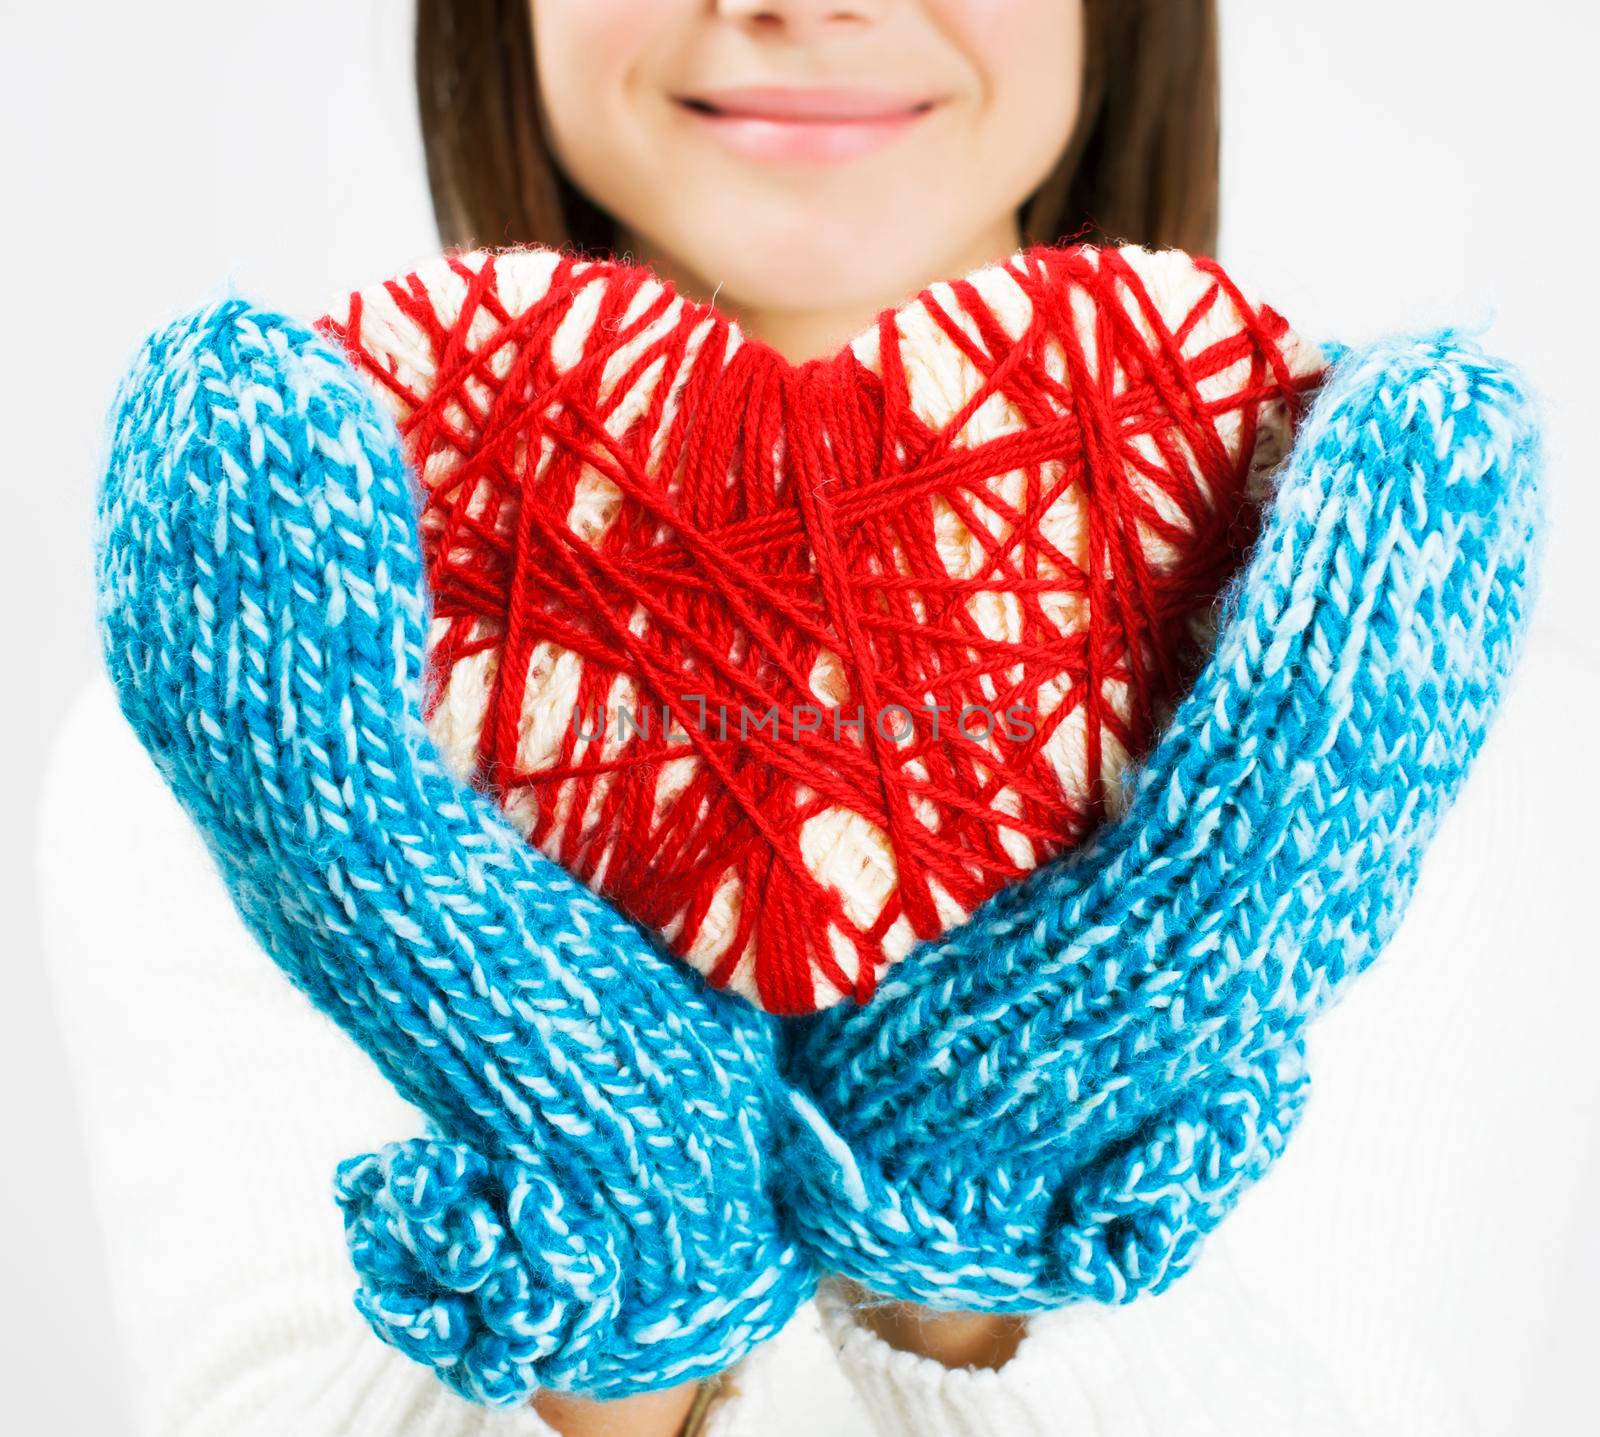 Girl hands in blue knitted mittens holding romantic red heart - by Jyliana